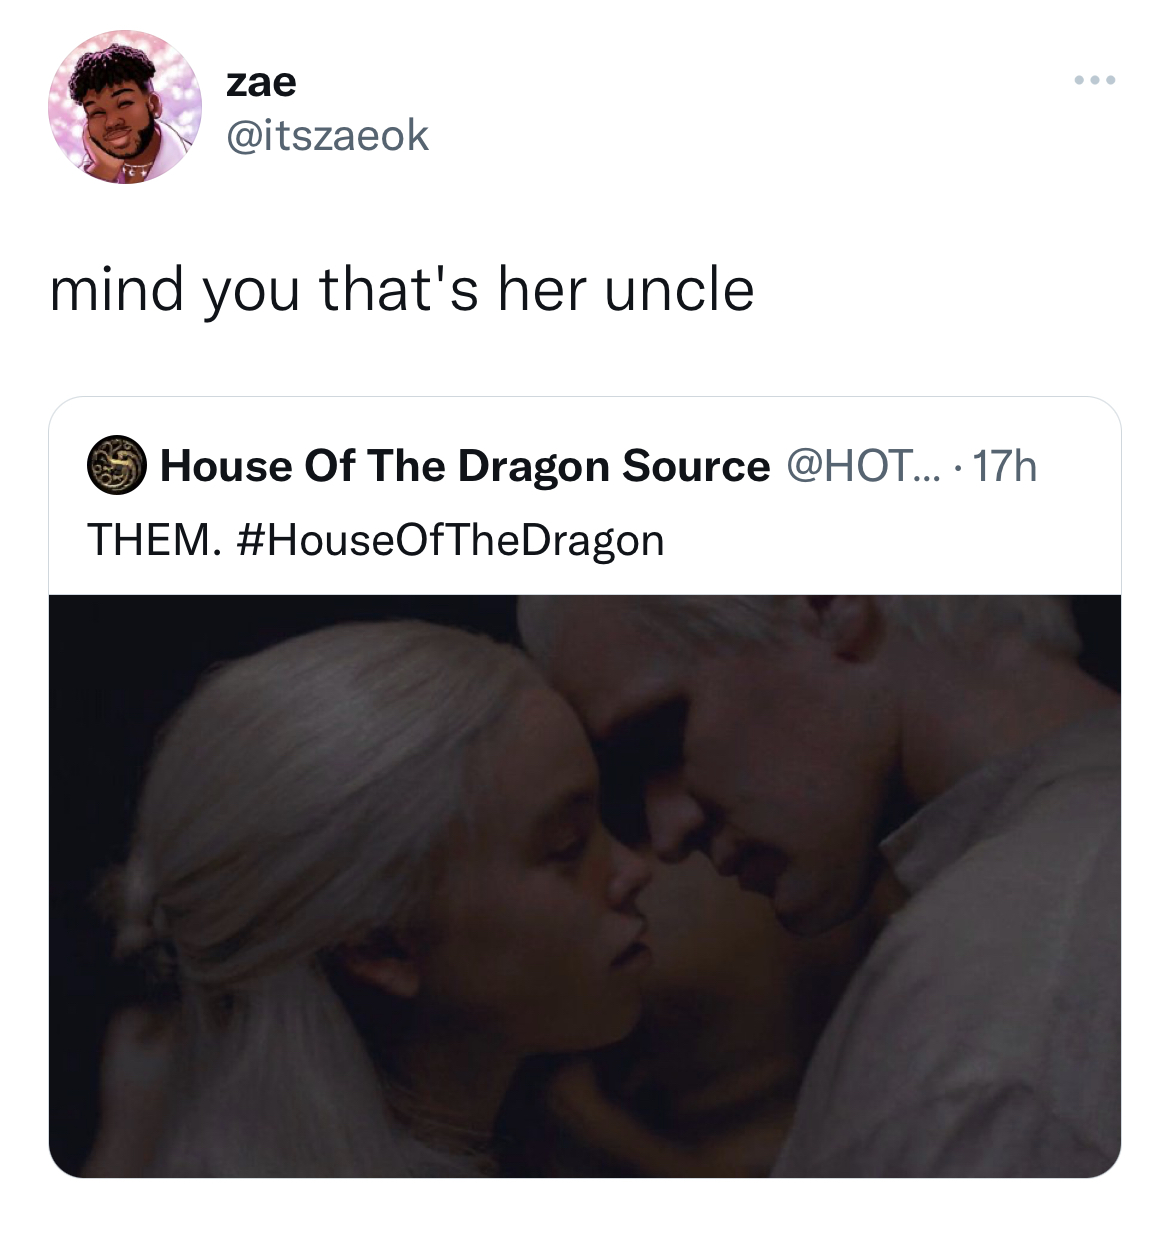 Fresh Daily Tweets - photo caption - zae mind you that's her uncle House Of The Dragon Source .... 17h Them. www